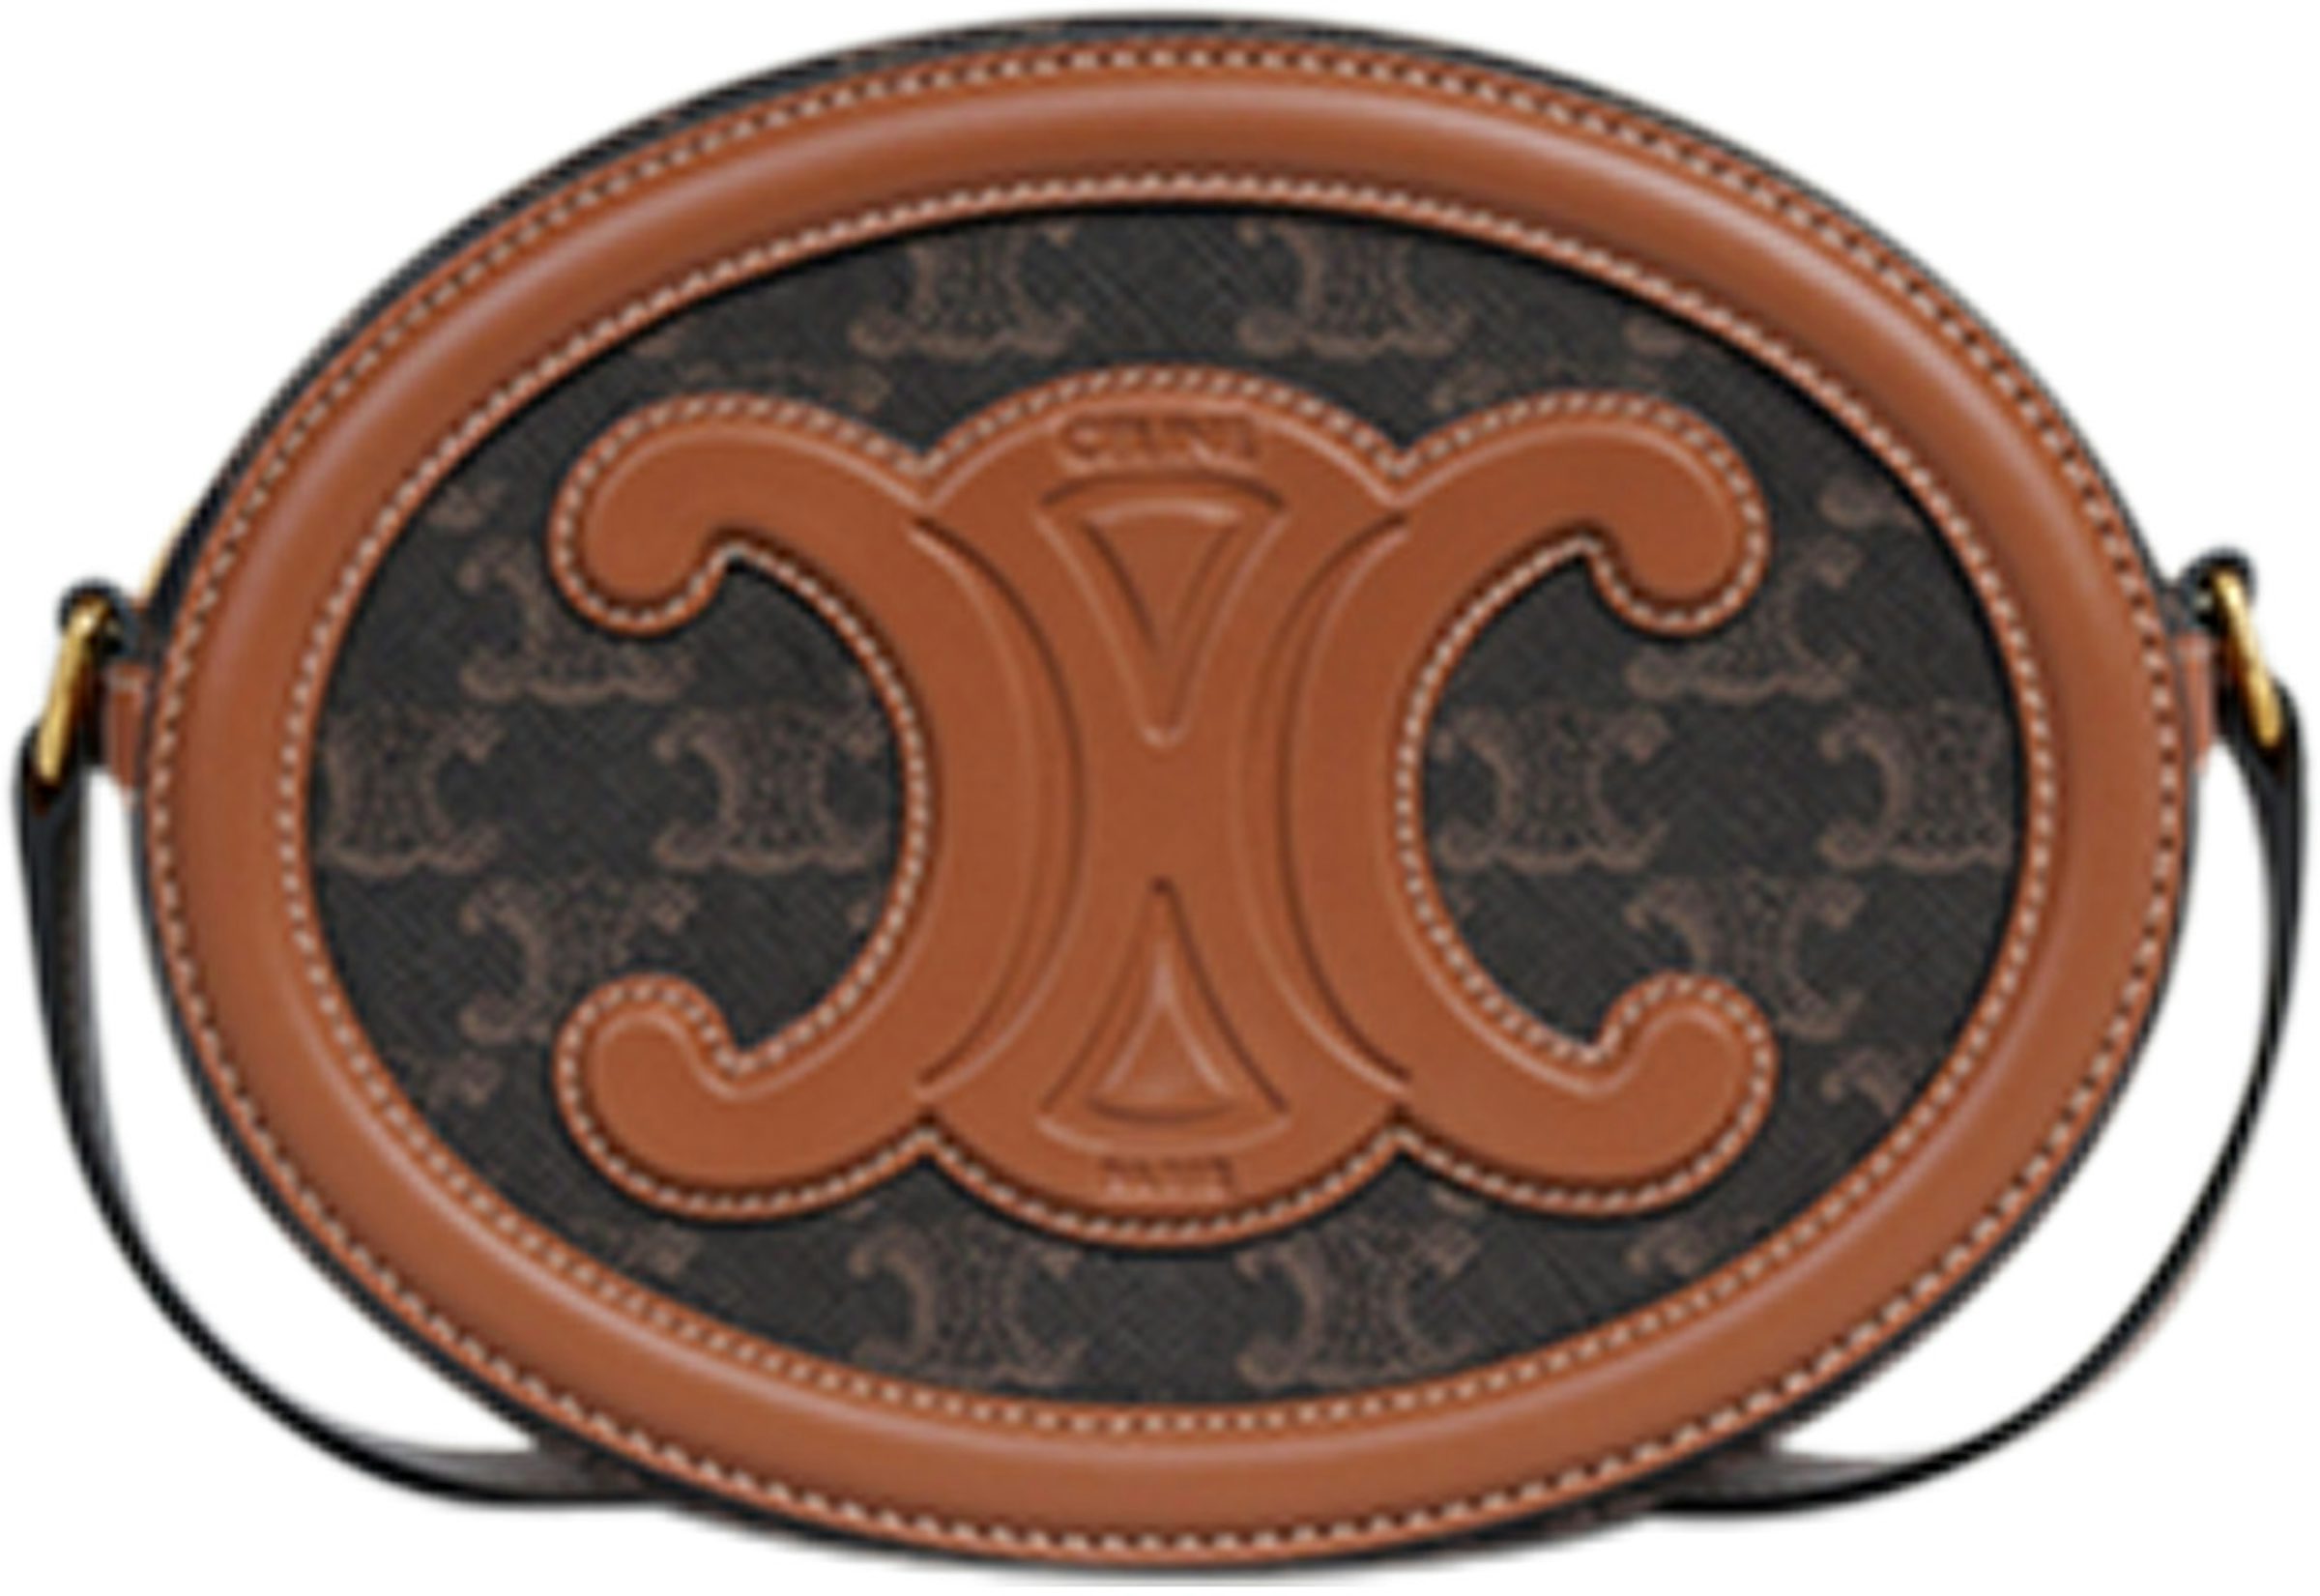 BELT BAG TRIOMPHE BELT IN TRIOMPHE CANVAS AND CALFSKIN - TAN